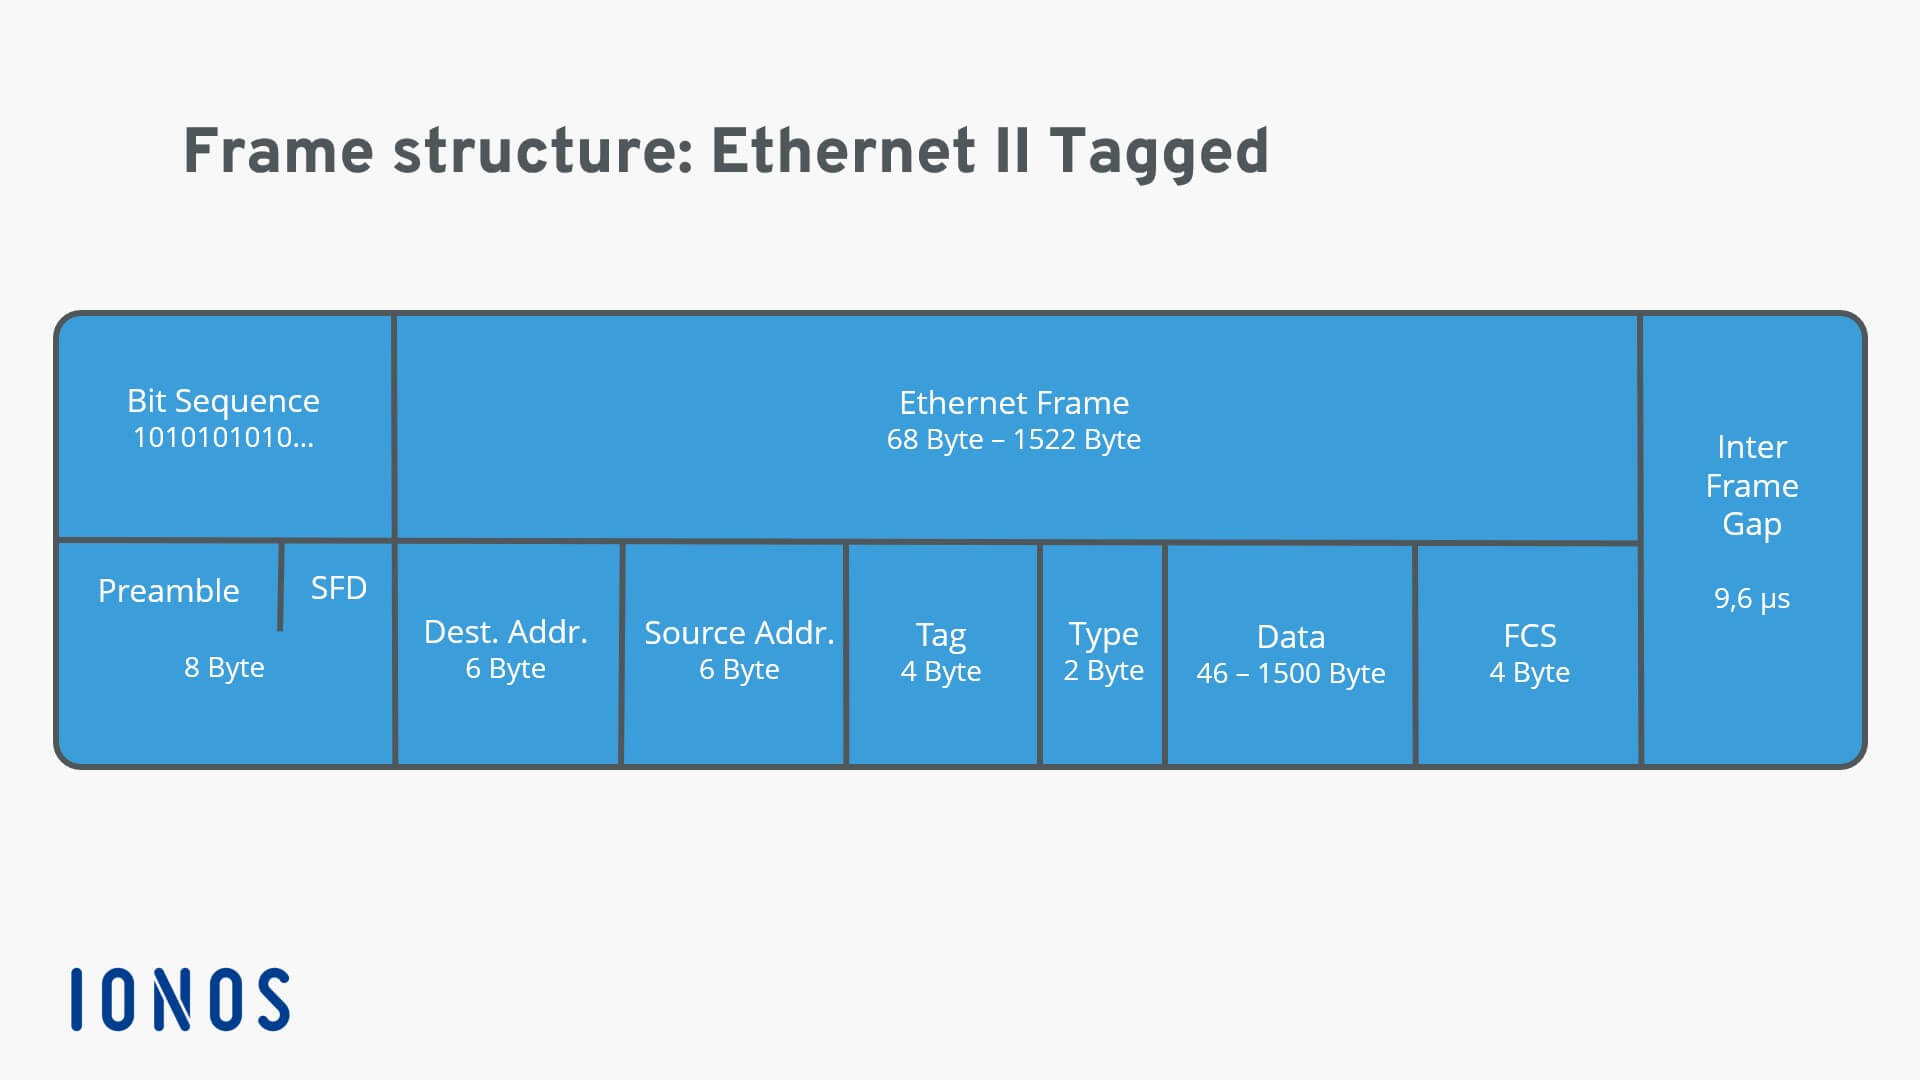 Representation of an Ethernet II tagged frame structure